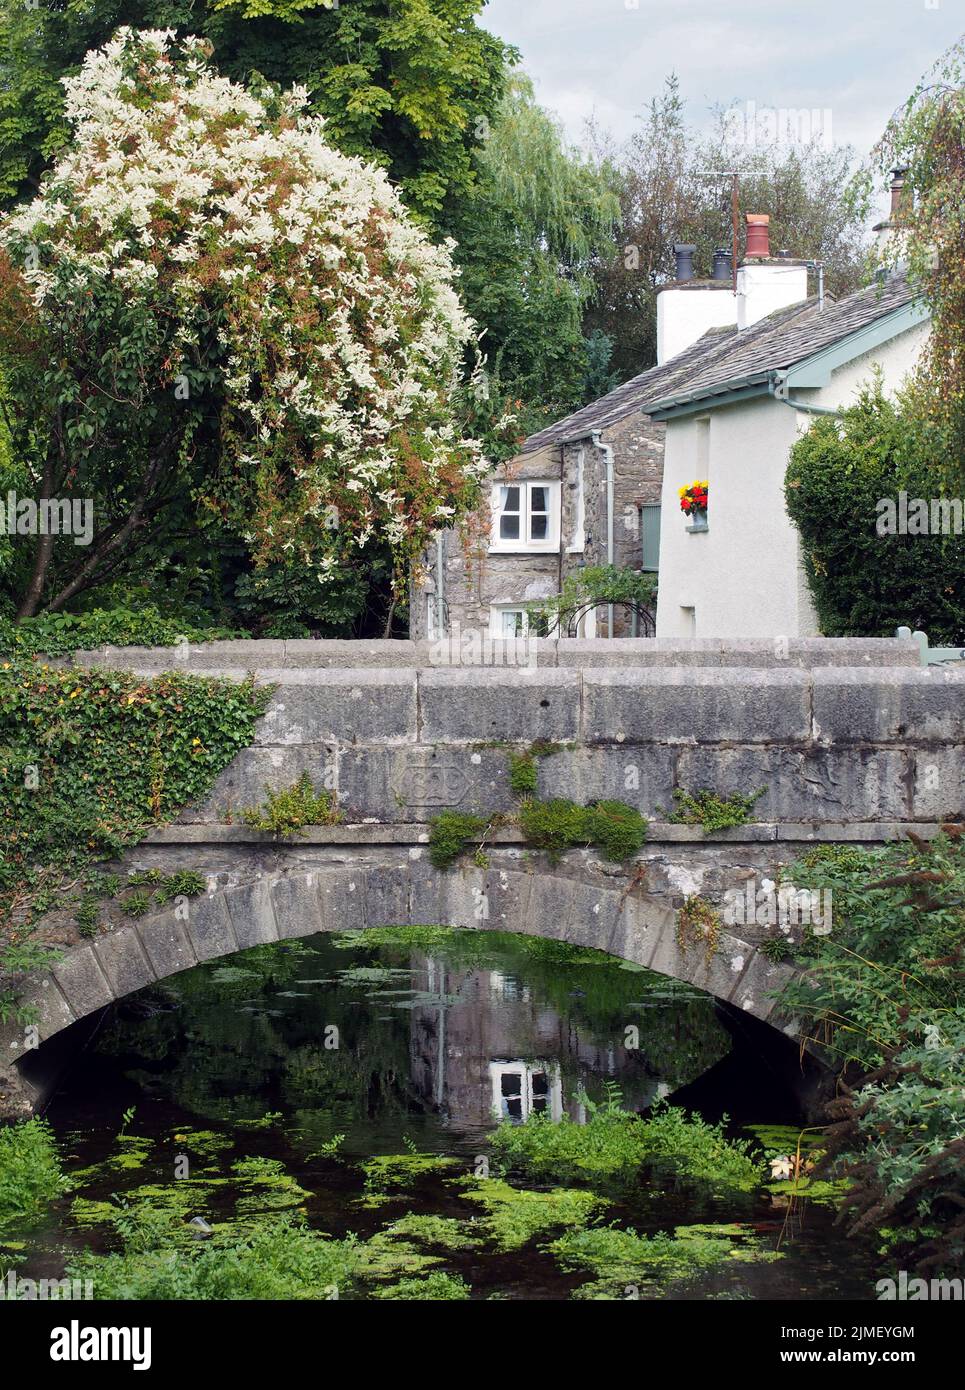 View of the bridge crossing the river with surrounding village houses in cartmel, cumbria Stock Photo